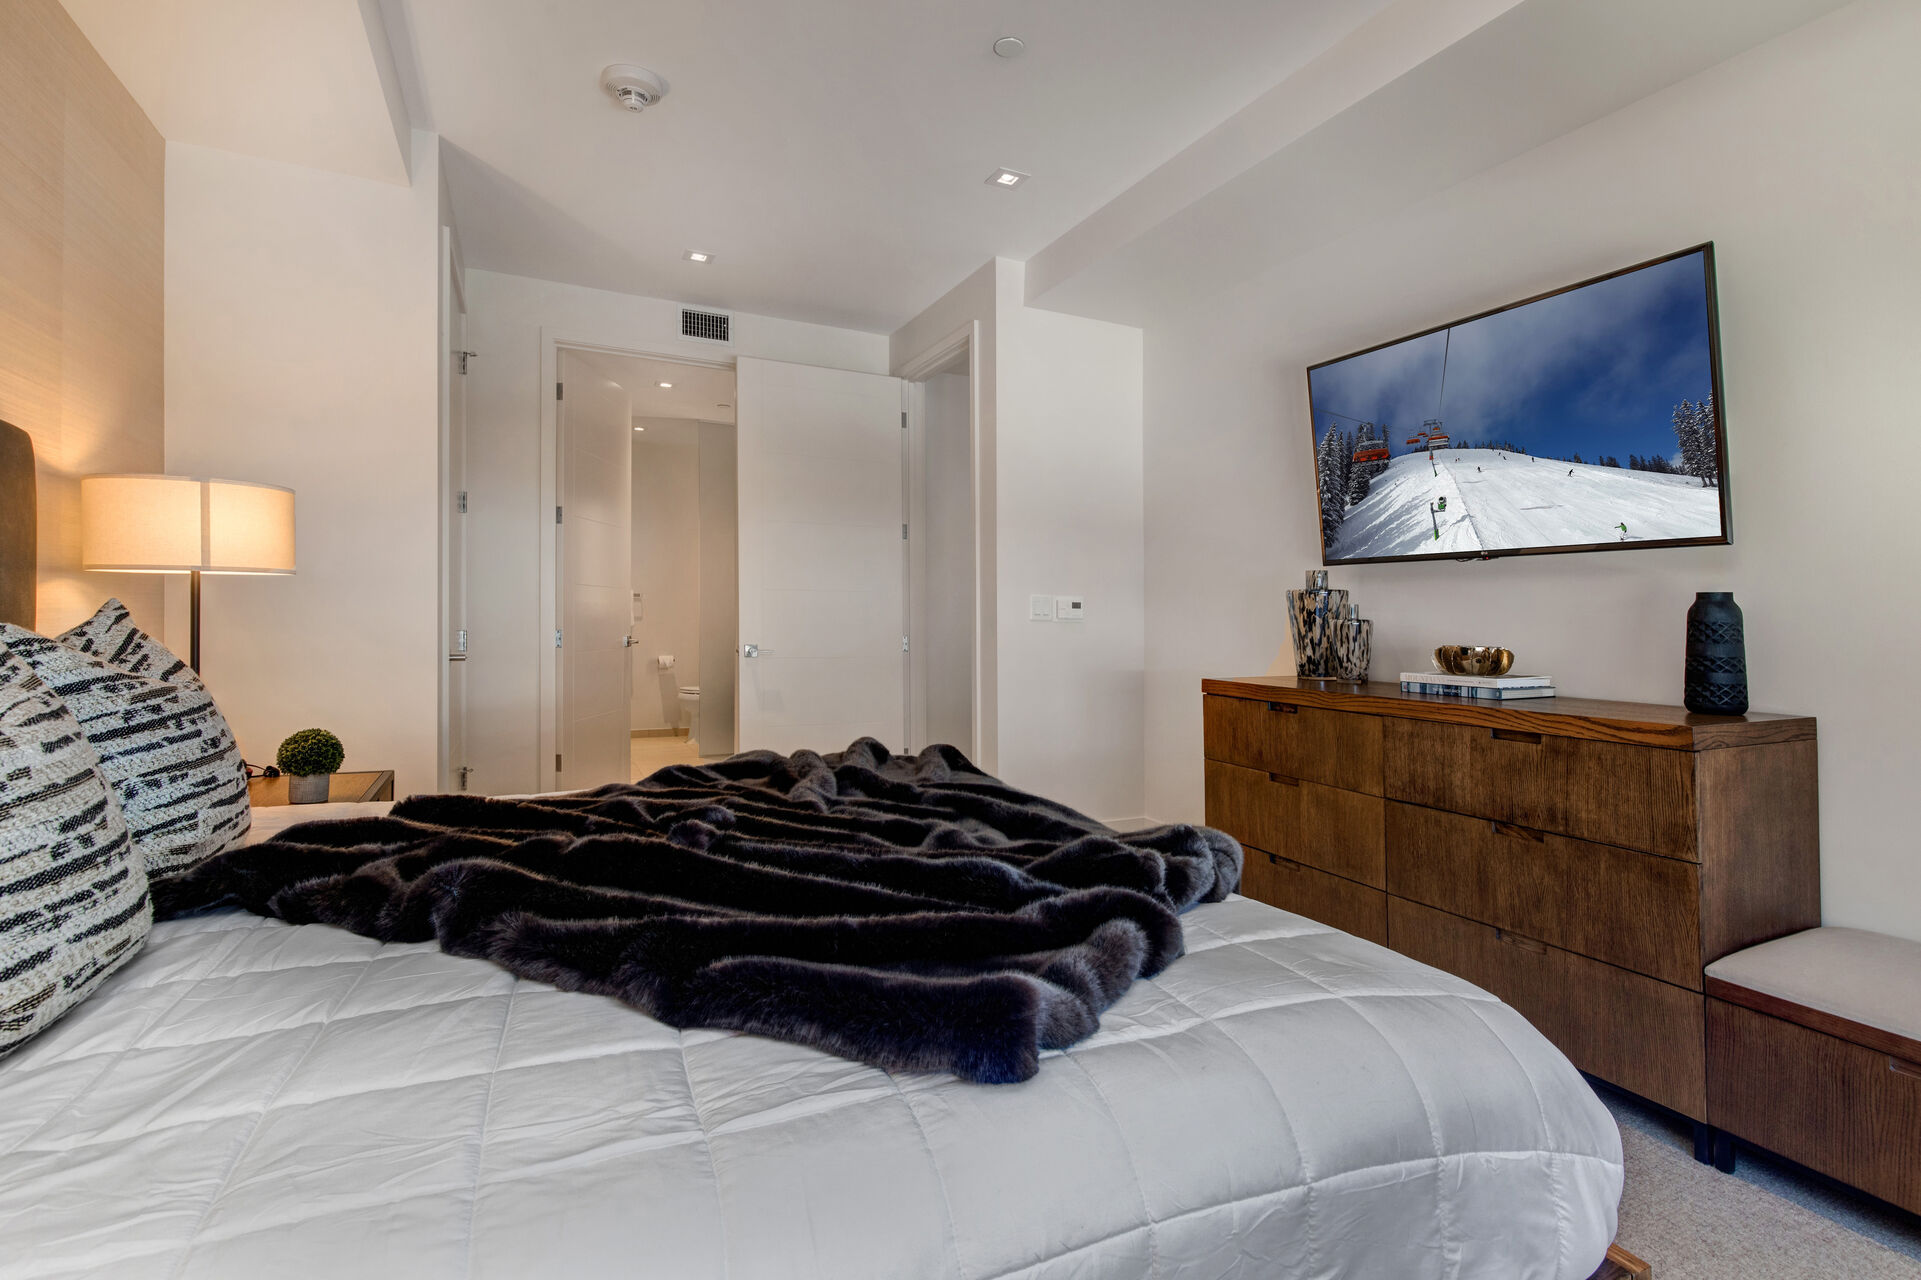 Master Bedroom with king bed, LG smart tv, reading bench, and en suite bathroom